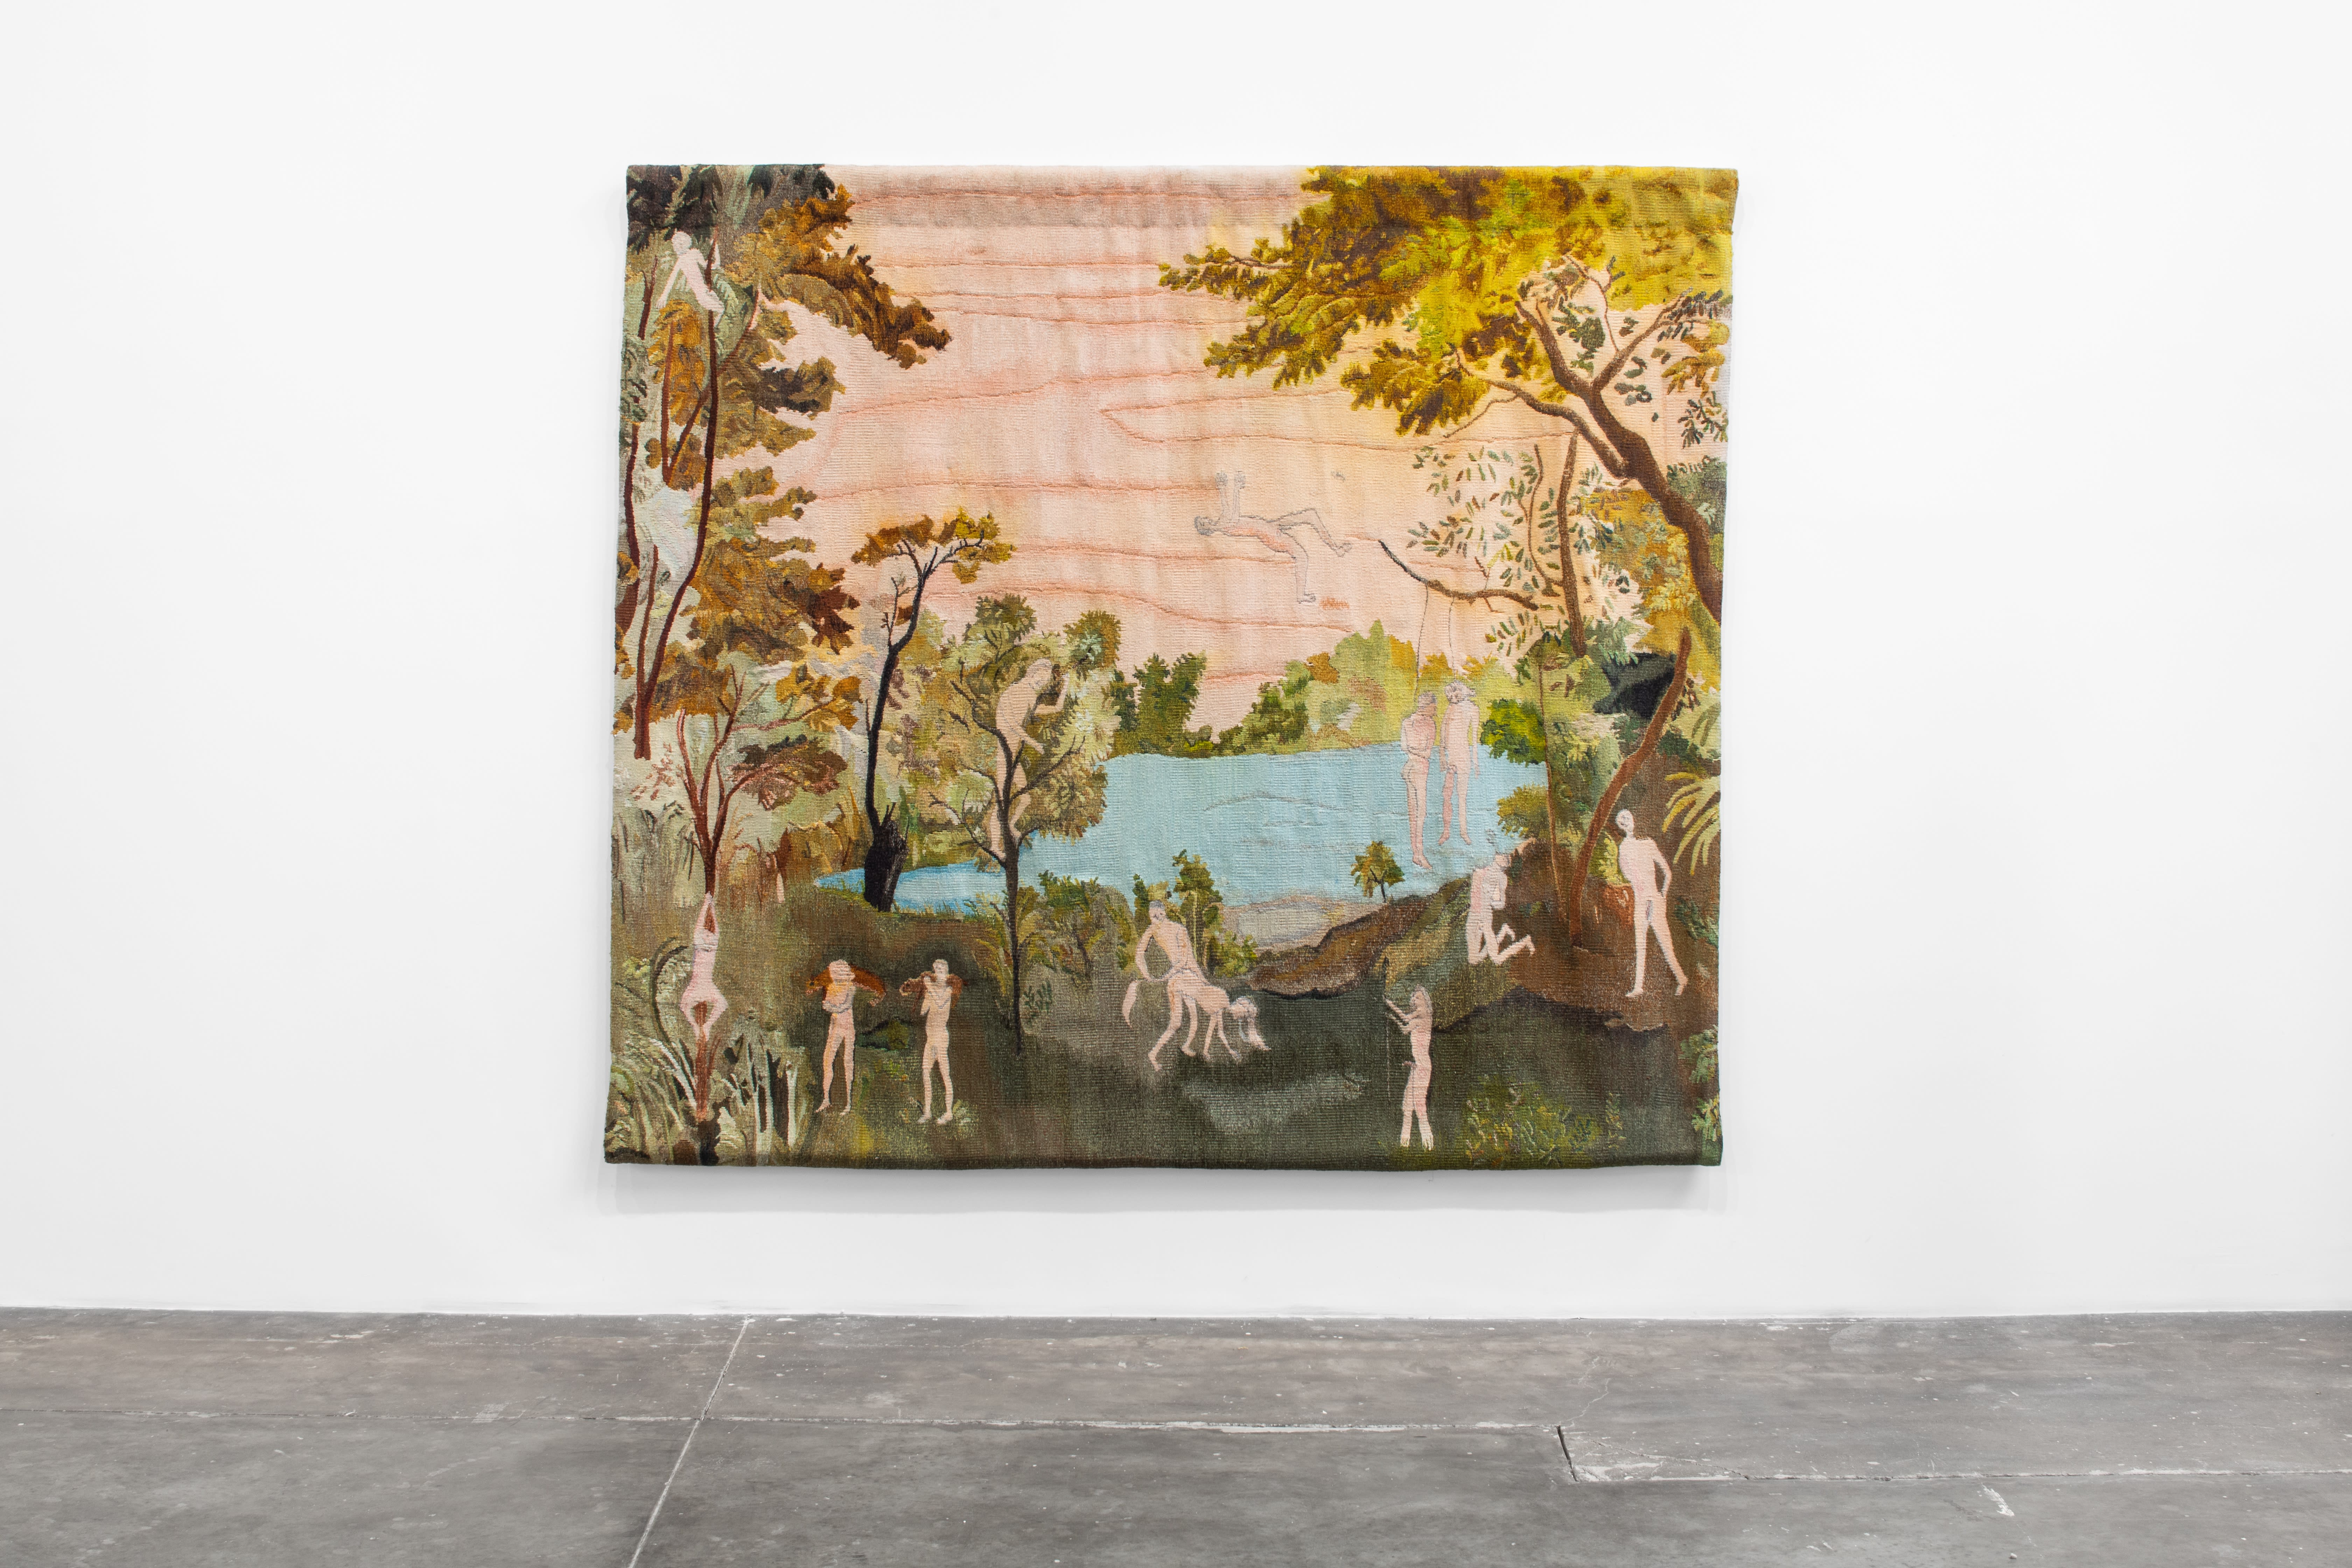 Sanam Khatibi’s Nothing has ever worked for me, 2022, in São Paulo exhibition